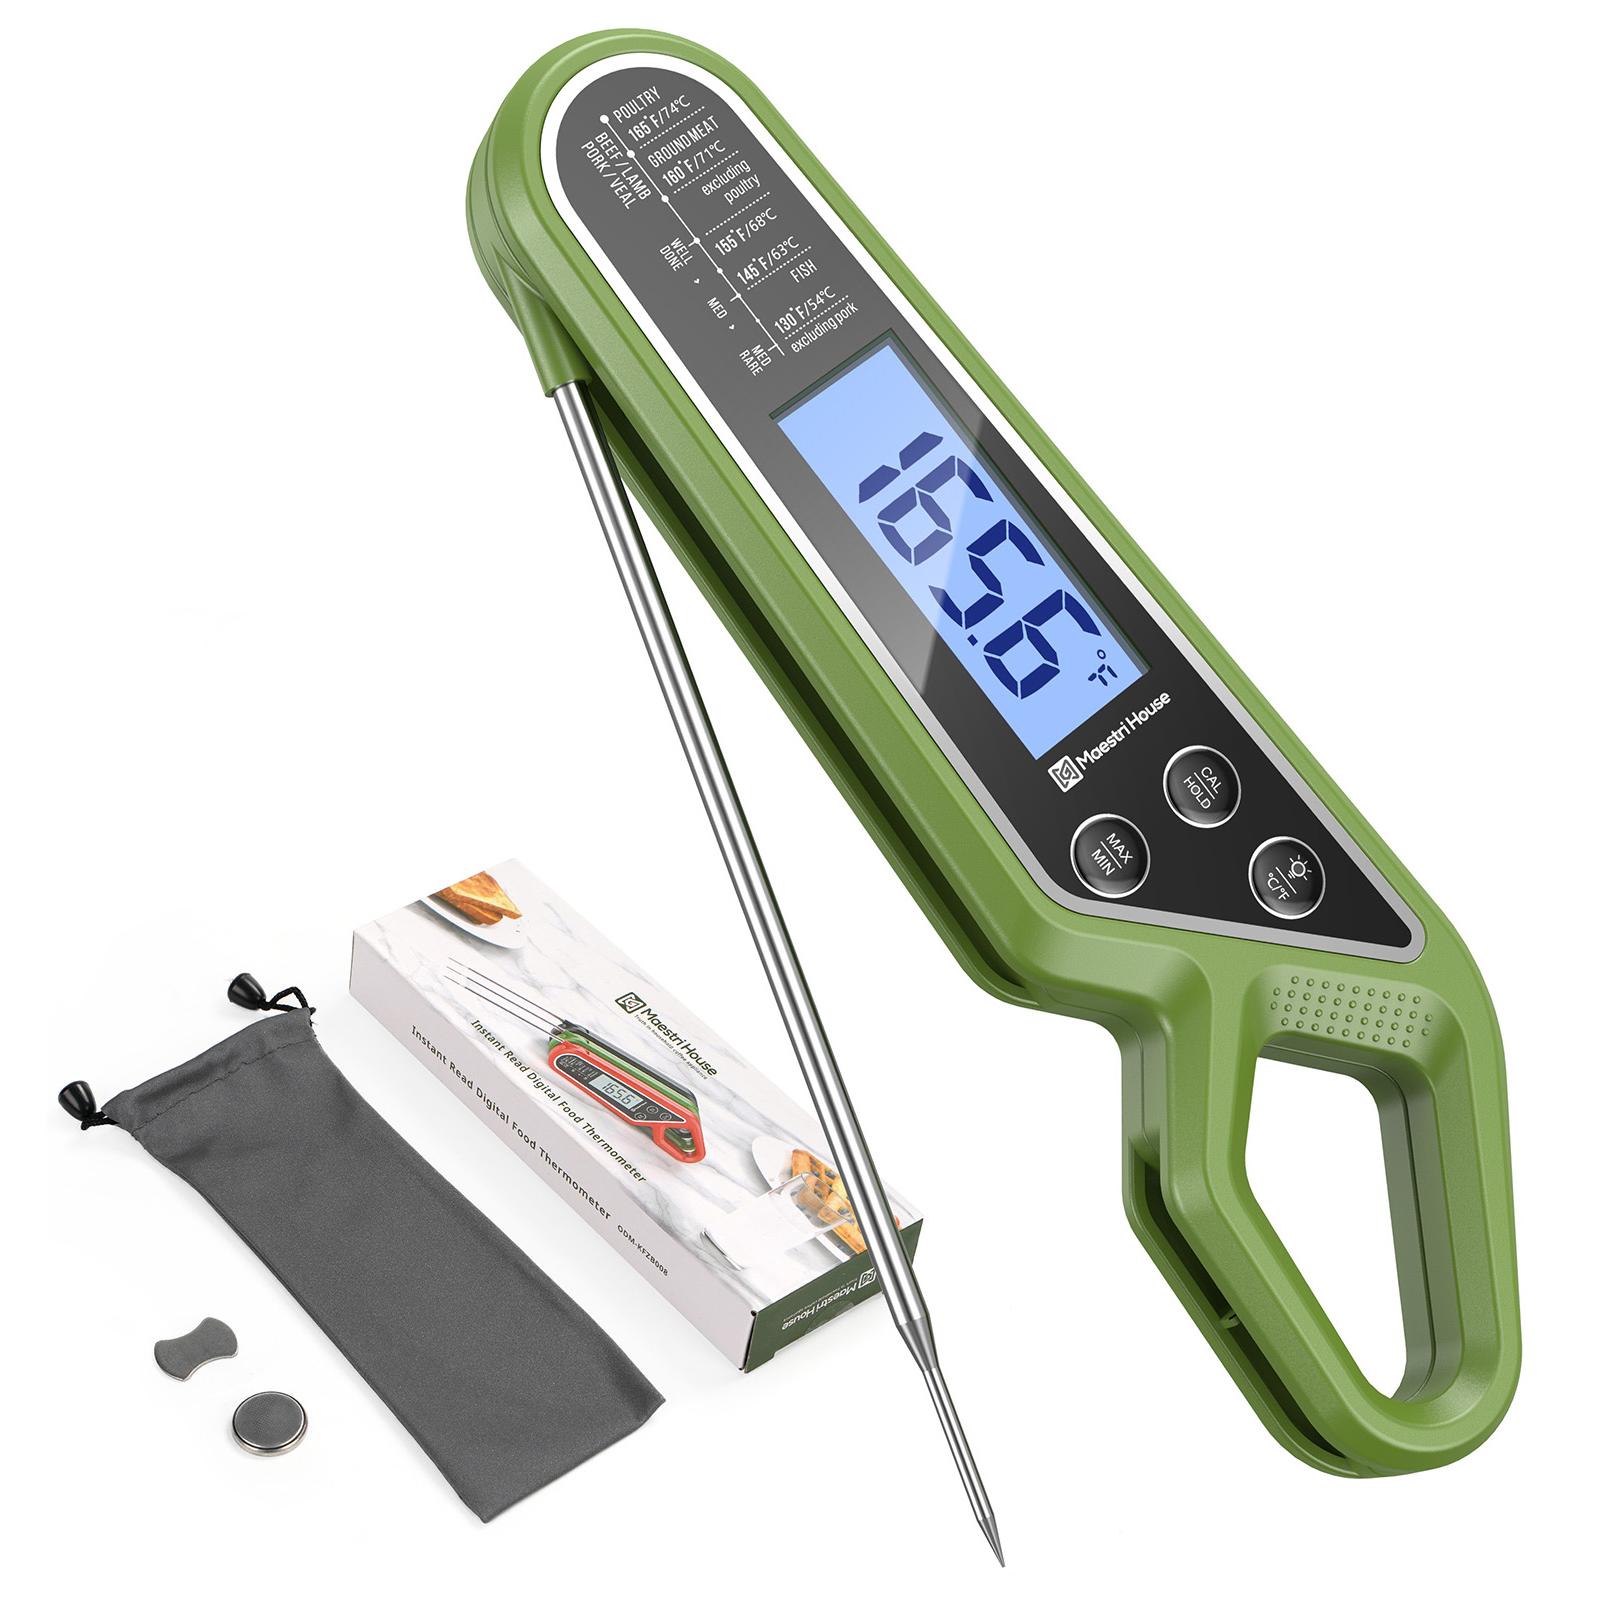 Electronic Baking & Cooking Scale - 4757 Premium Kitchen Accessories